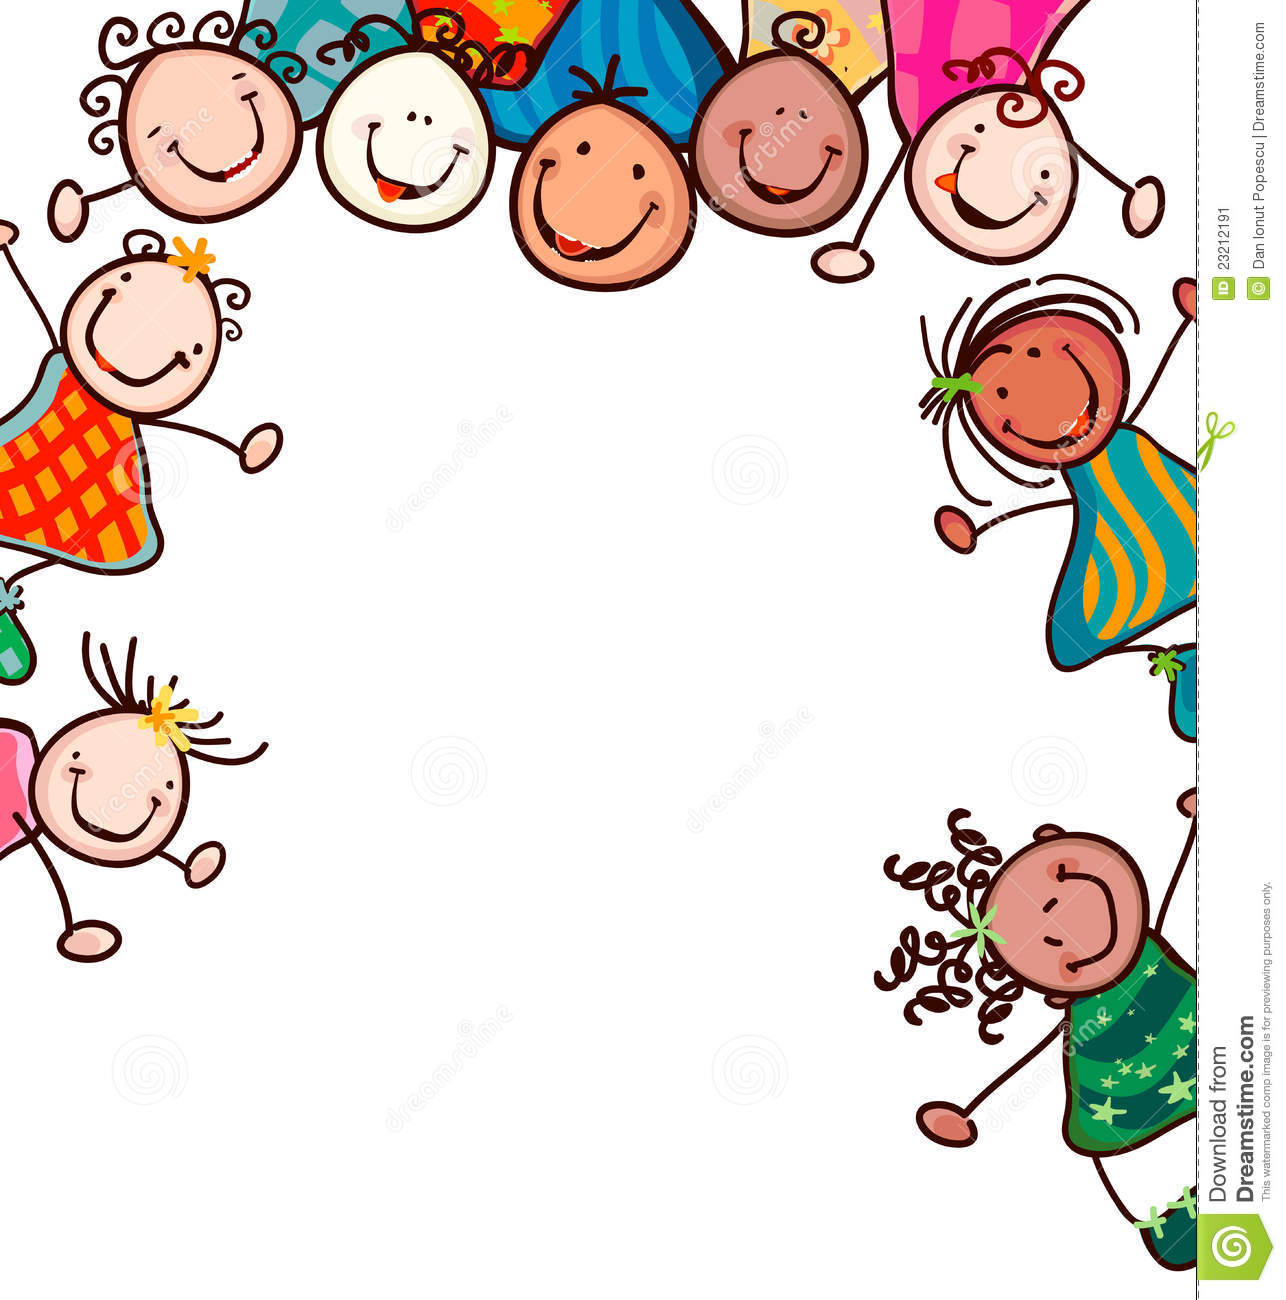 Free Clip Art Children & Clip Art Children Clip Art Images.